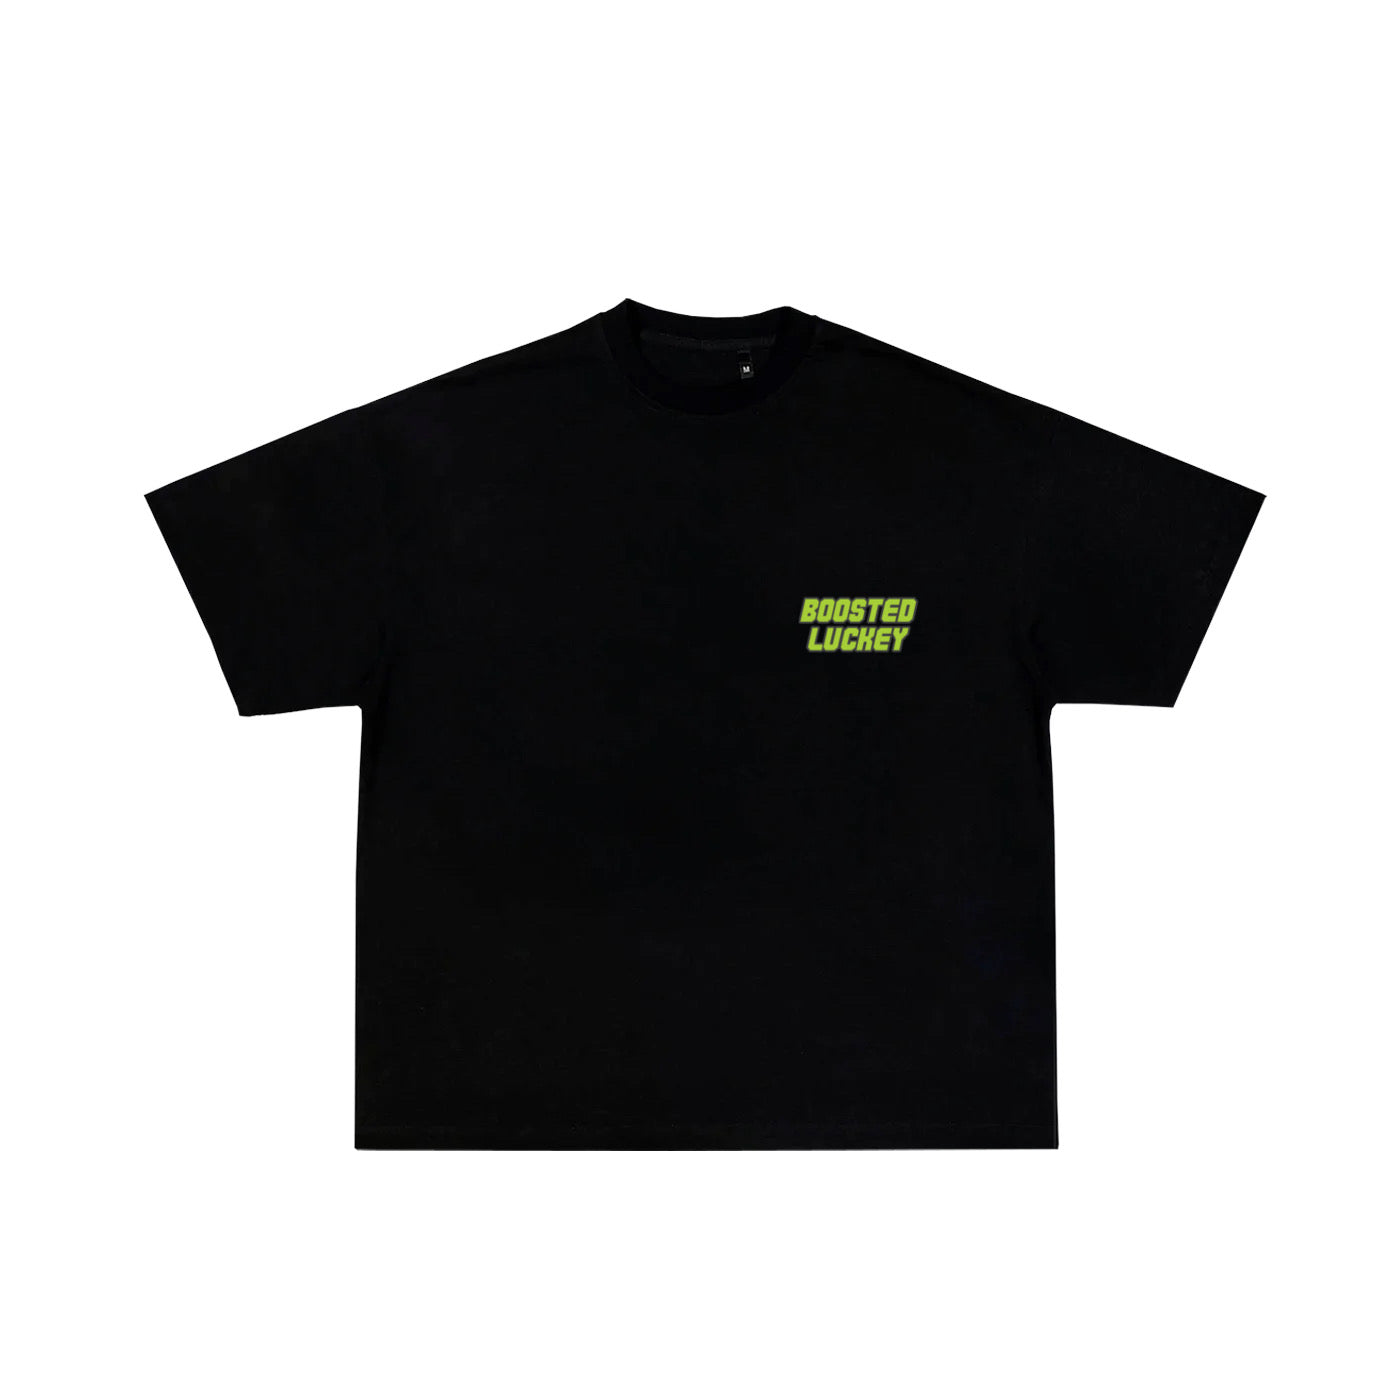 Boosted Luckey “Whipple Time” T Shirt - BOOSTED LUCKEY